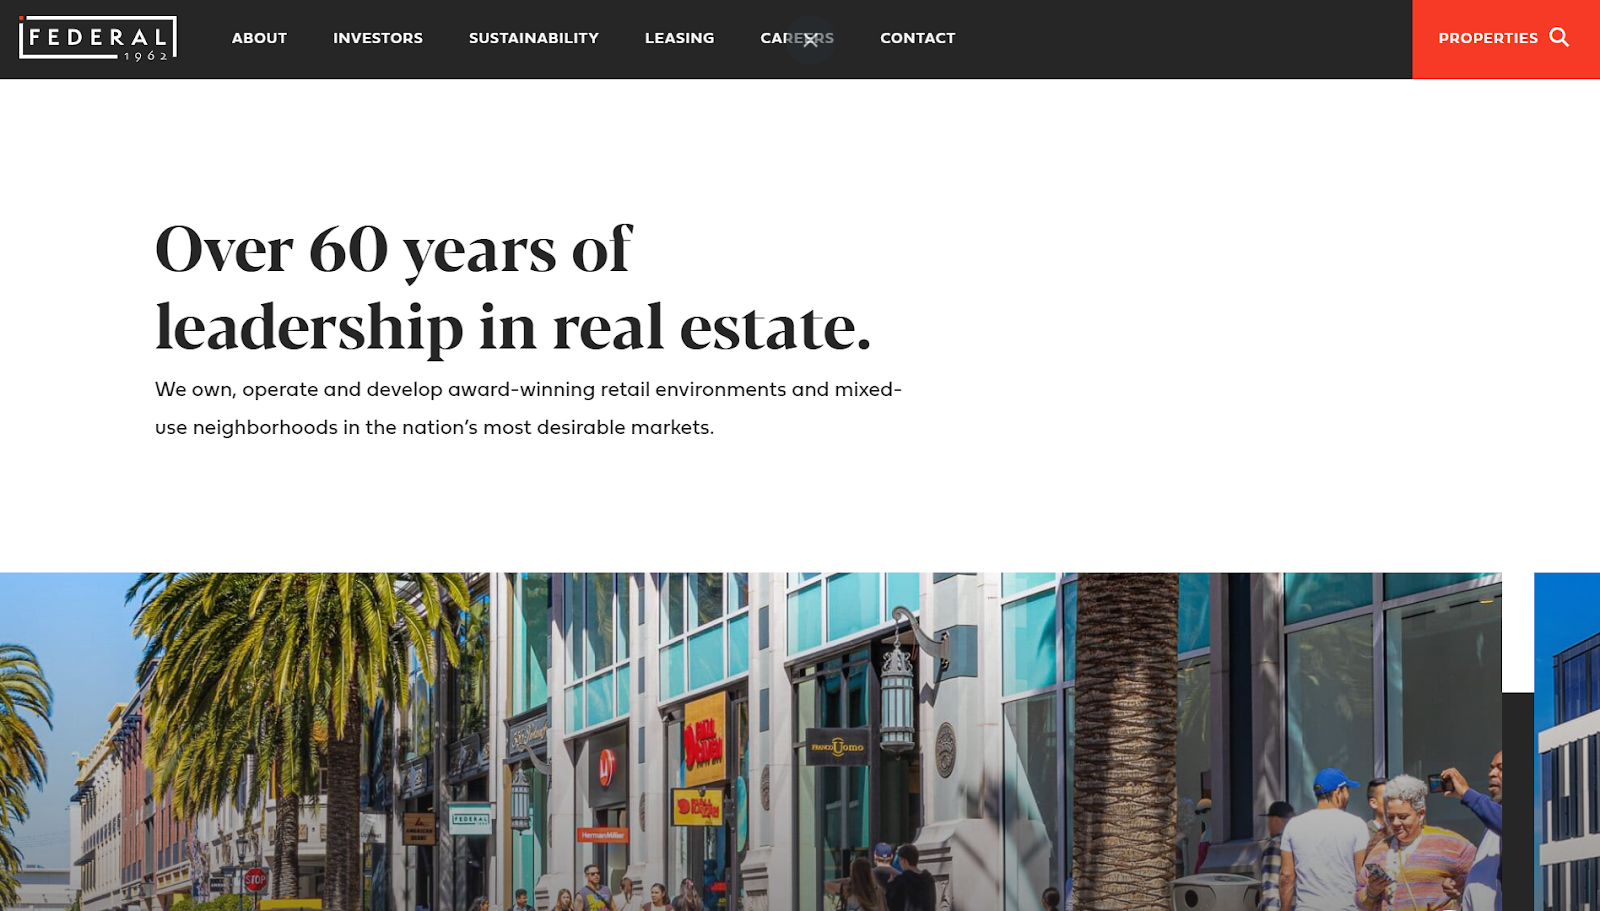 Webpage of An S&P 500 real estate
company founded in 1962.